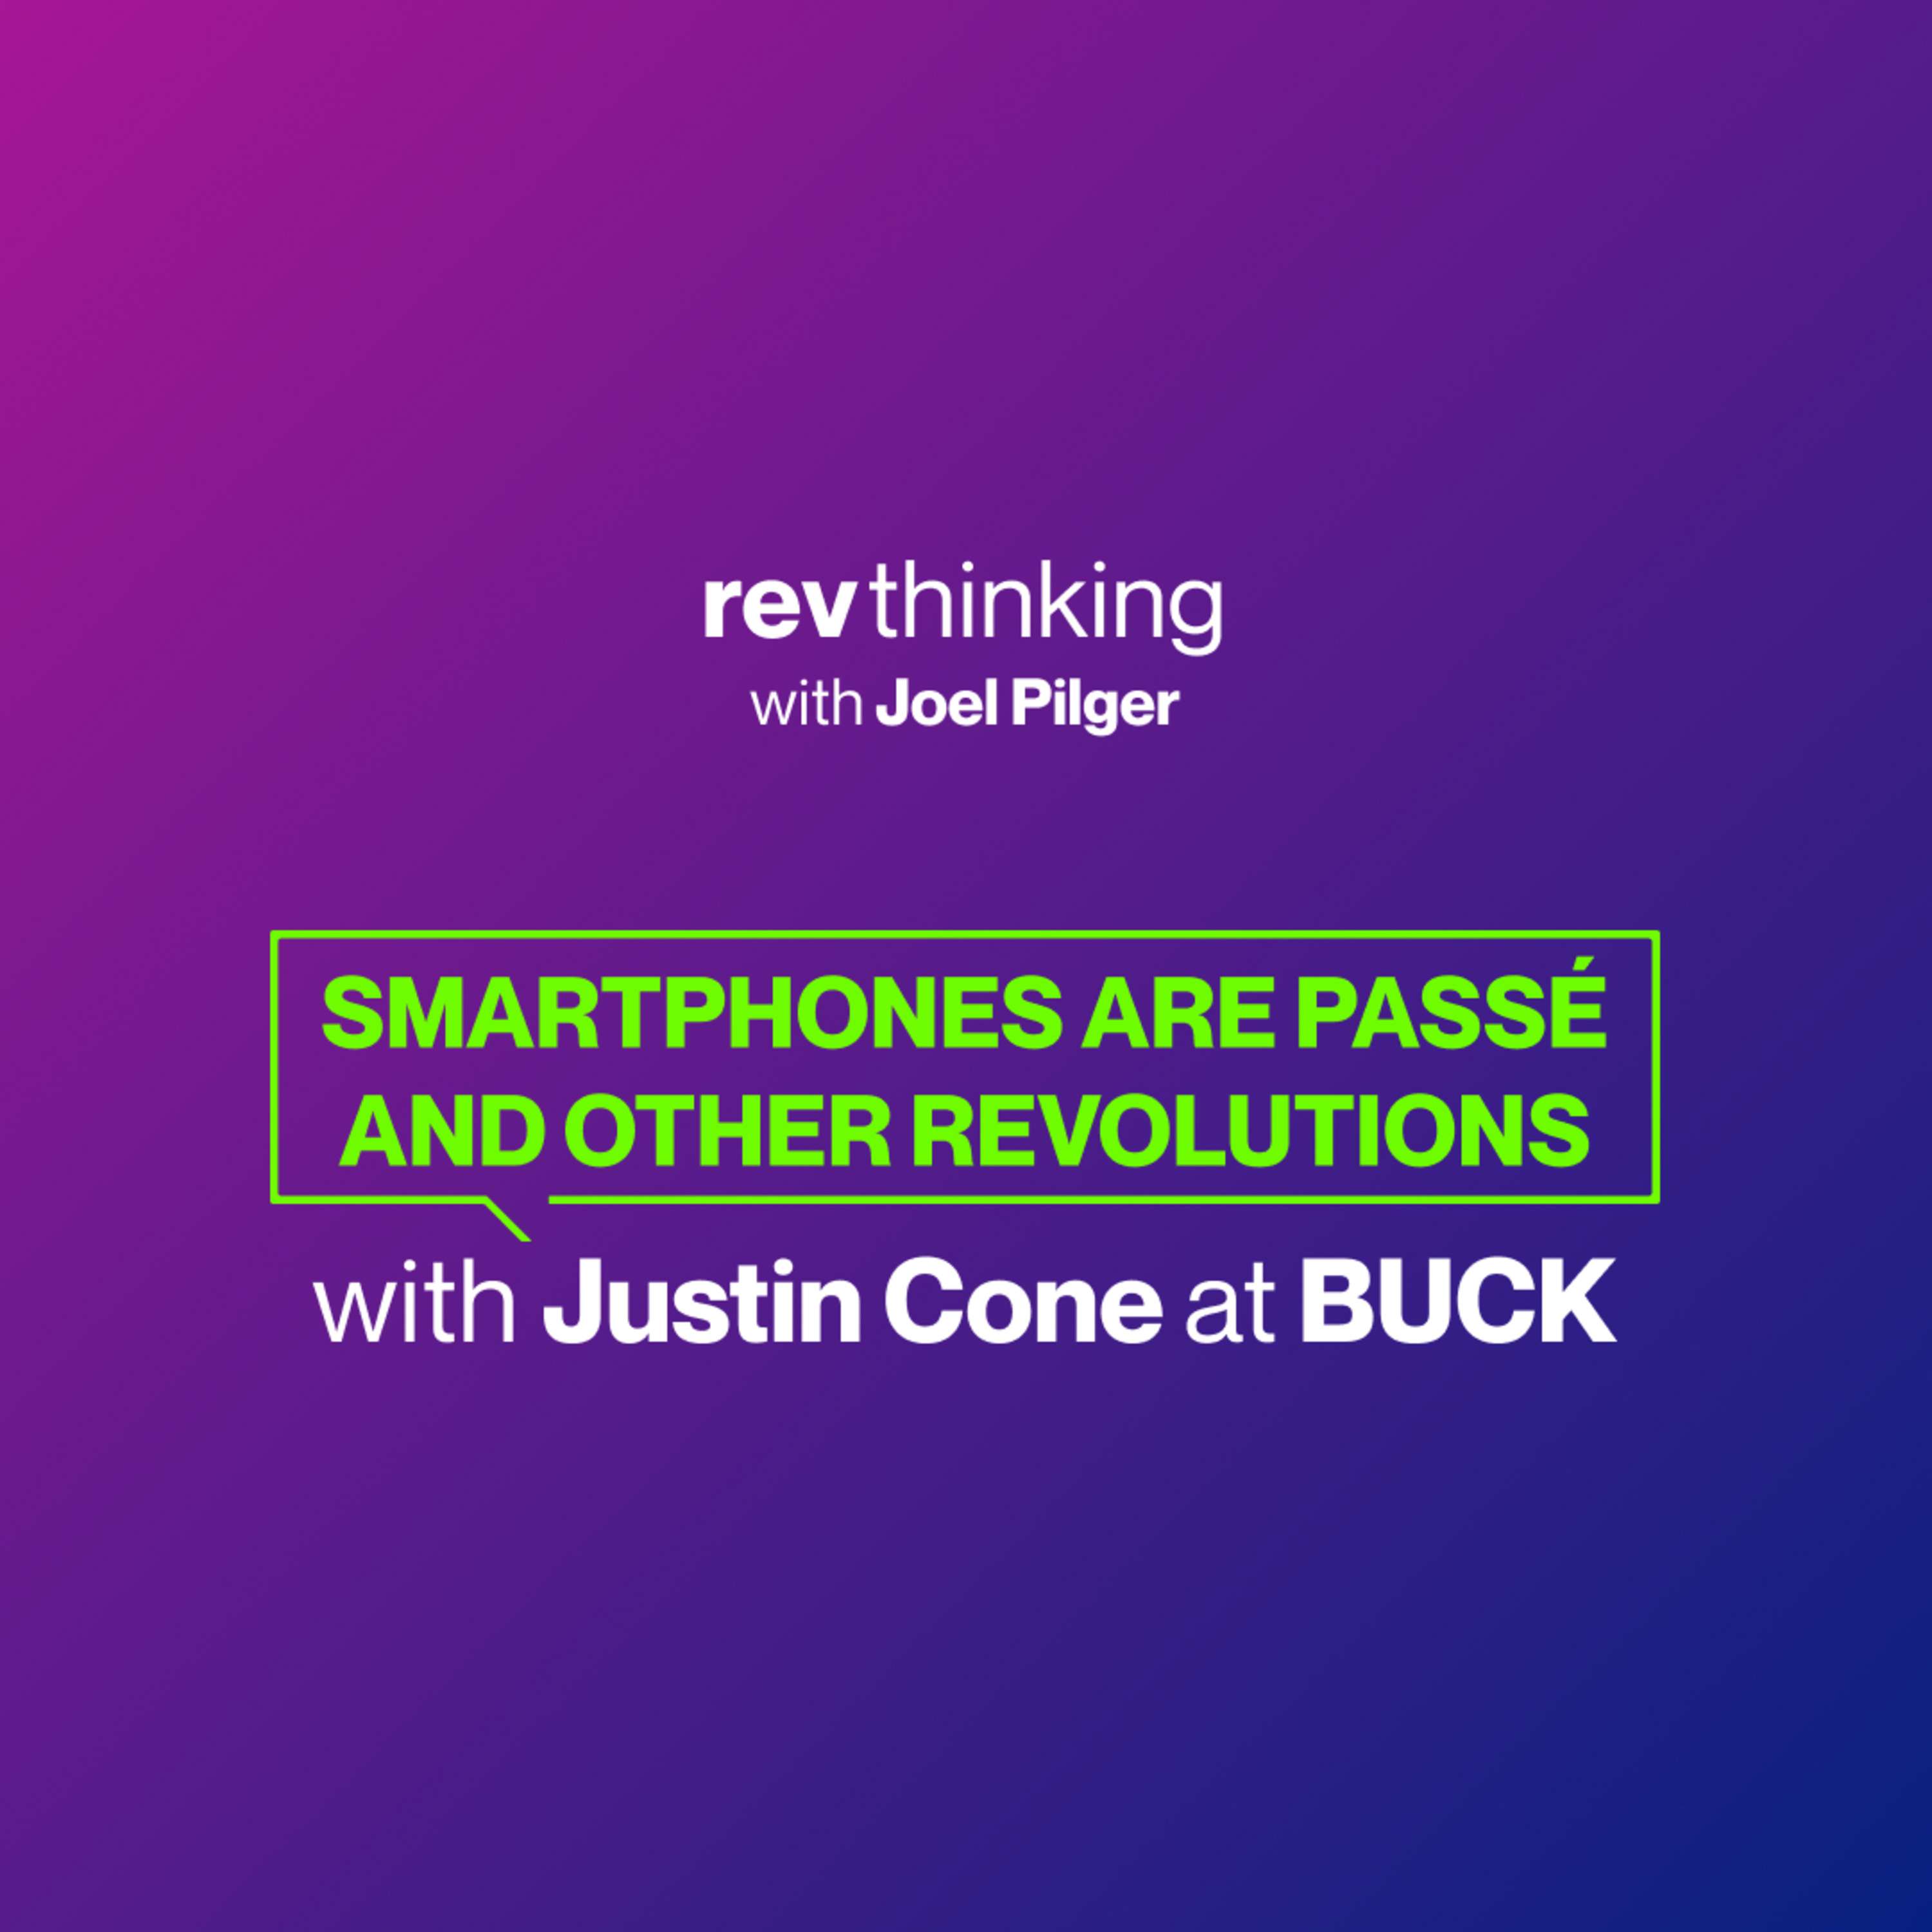 Smartphones Are Passé and Other Revolutions with Justin Cone